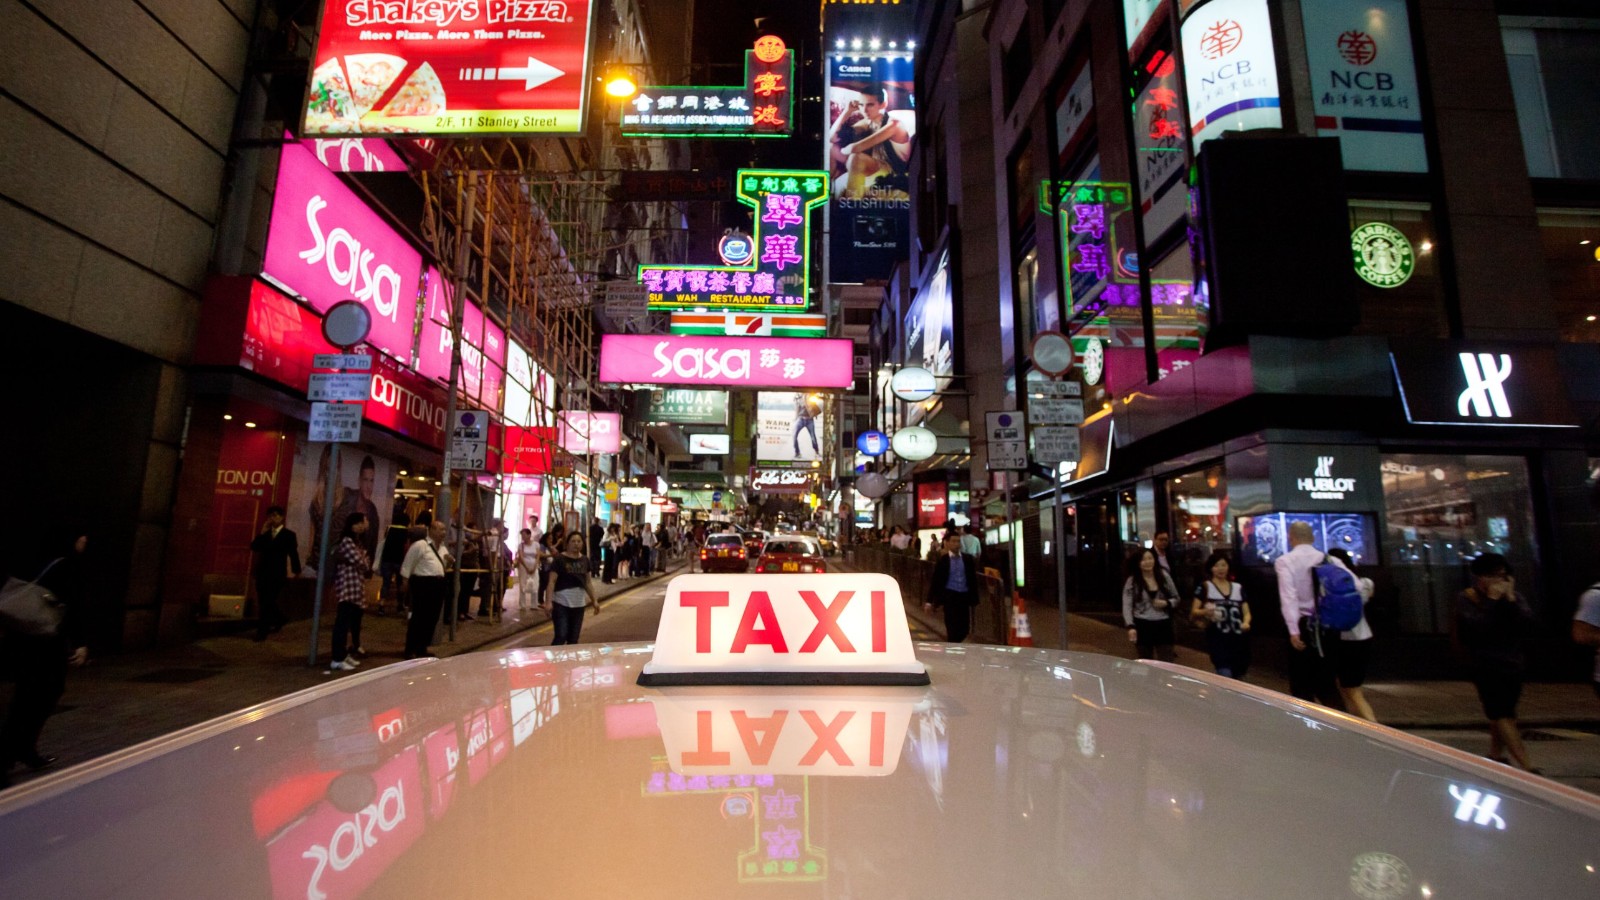 Taxis offer road to redemption for Hong Kong's ex-cons - CNN